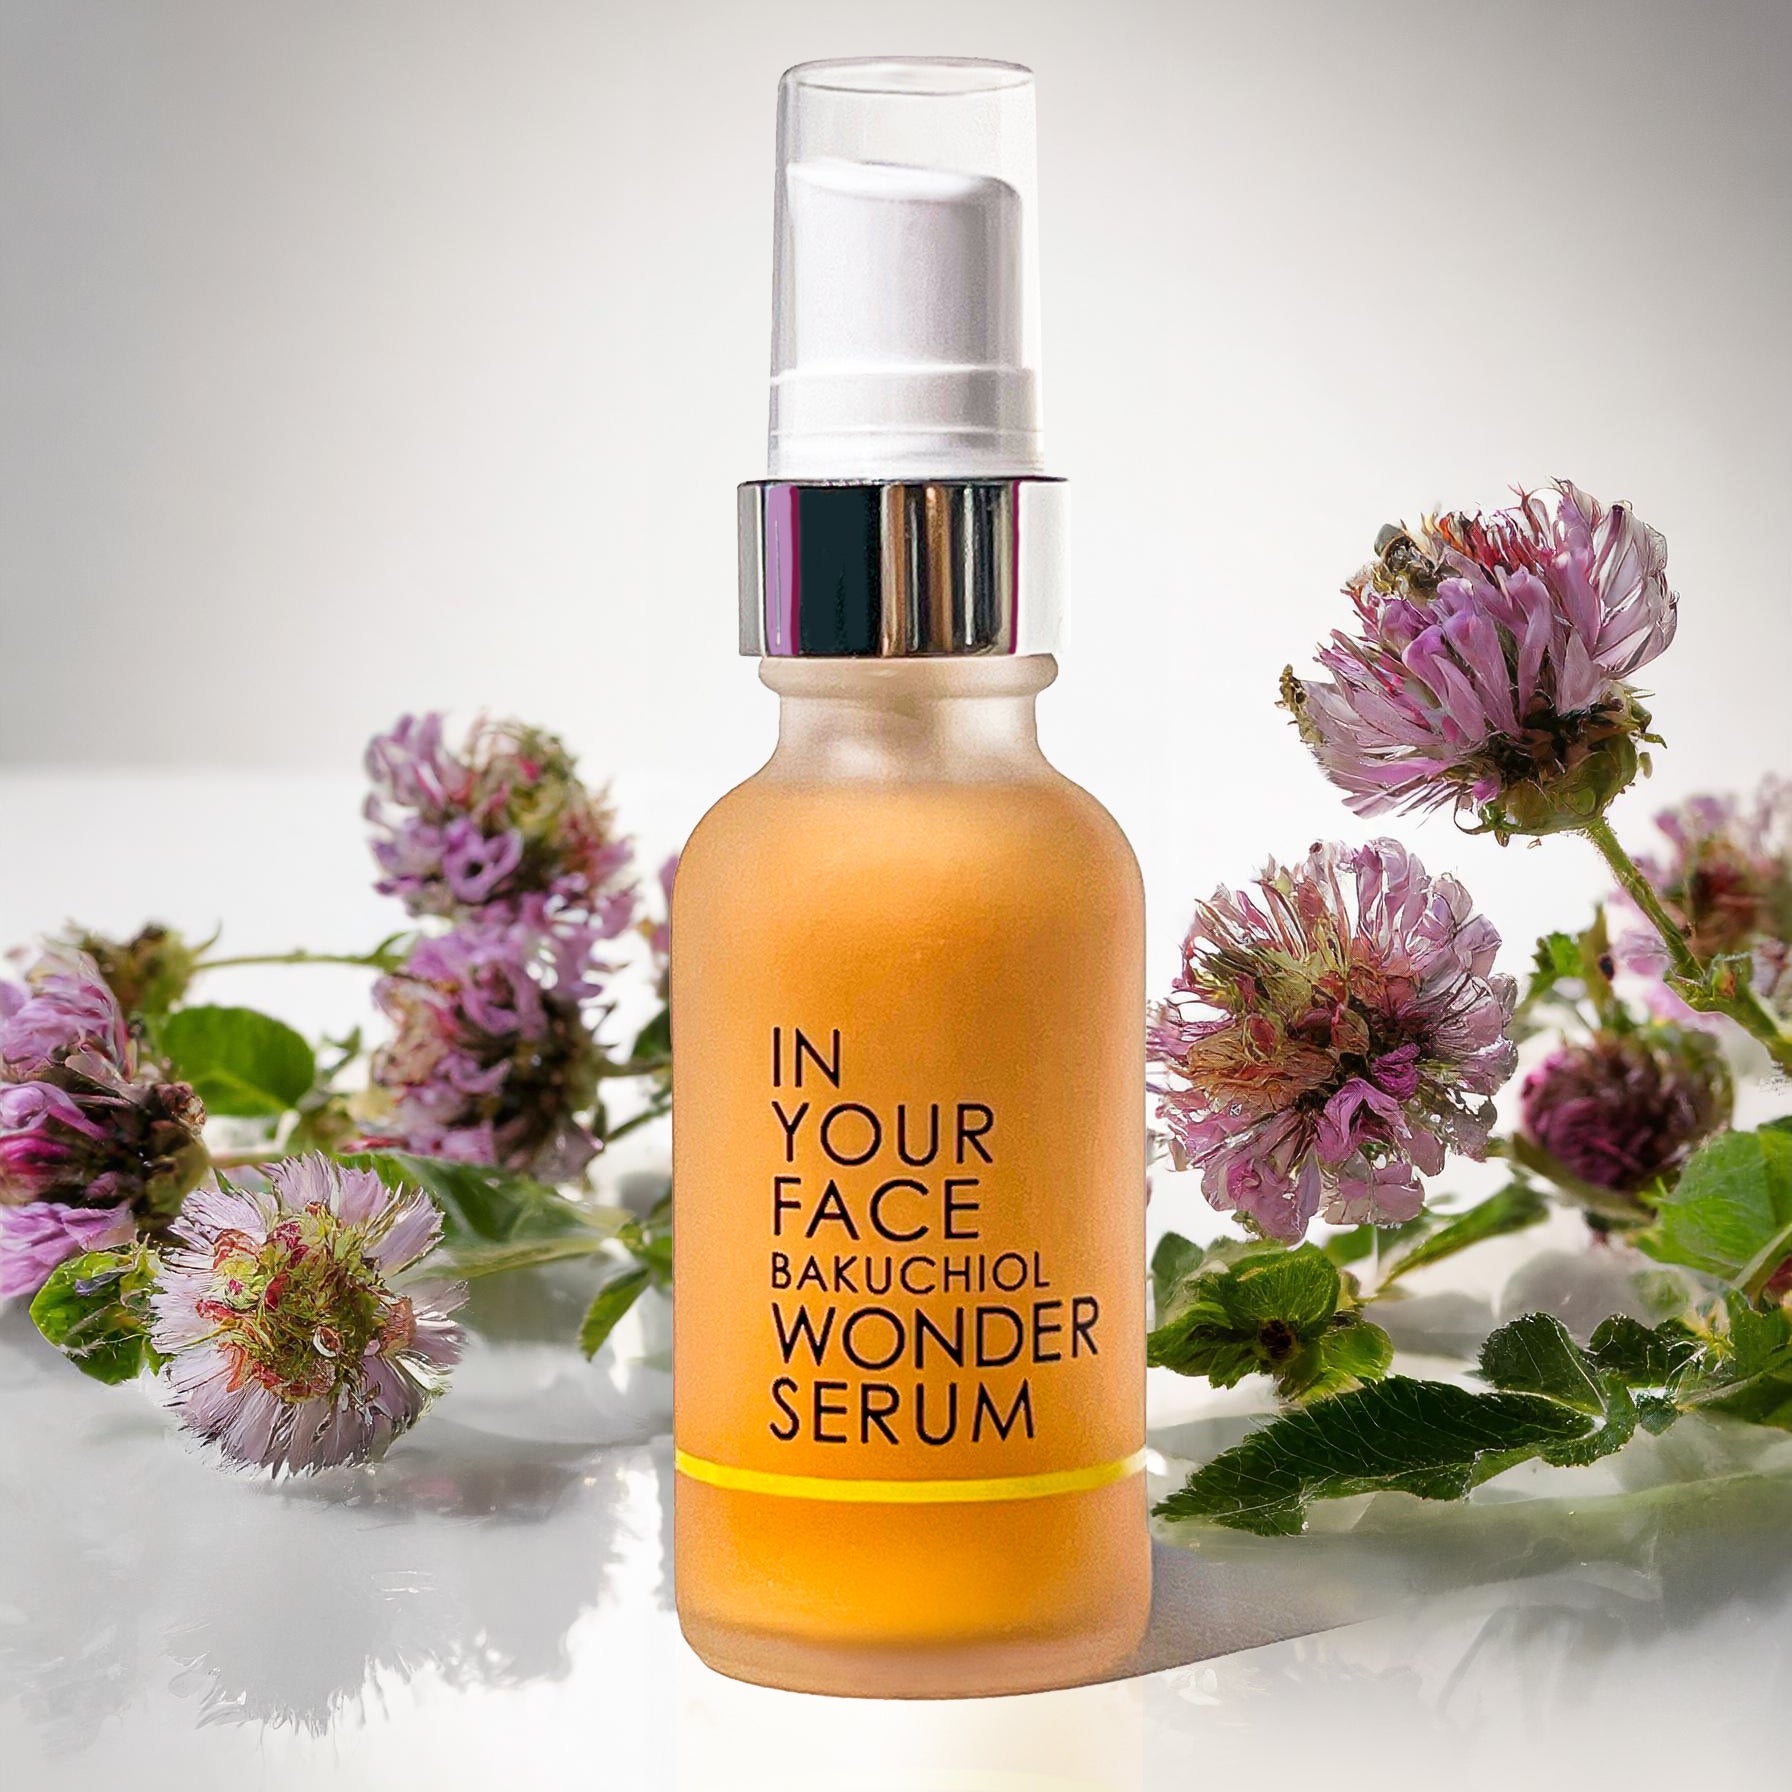 an image of the IN YOUR FACE BAKUCHIOL WONDER SERUM with bakuchiol flowers in the background